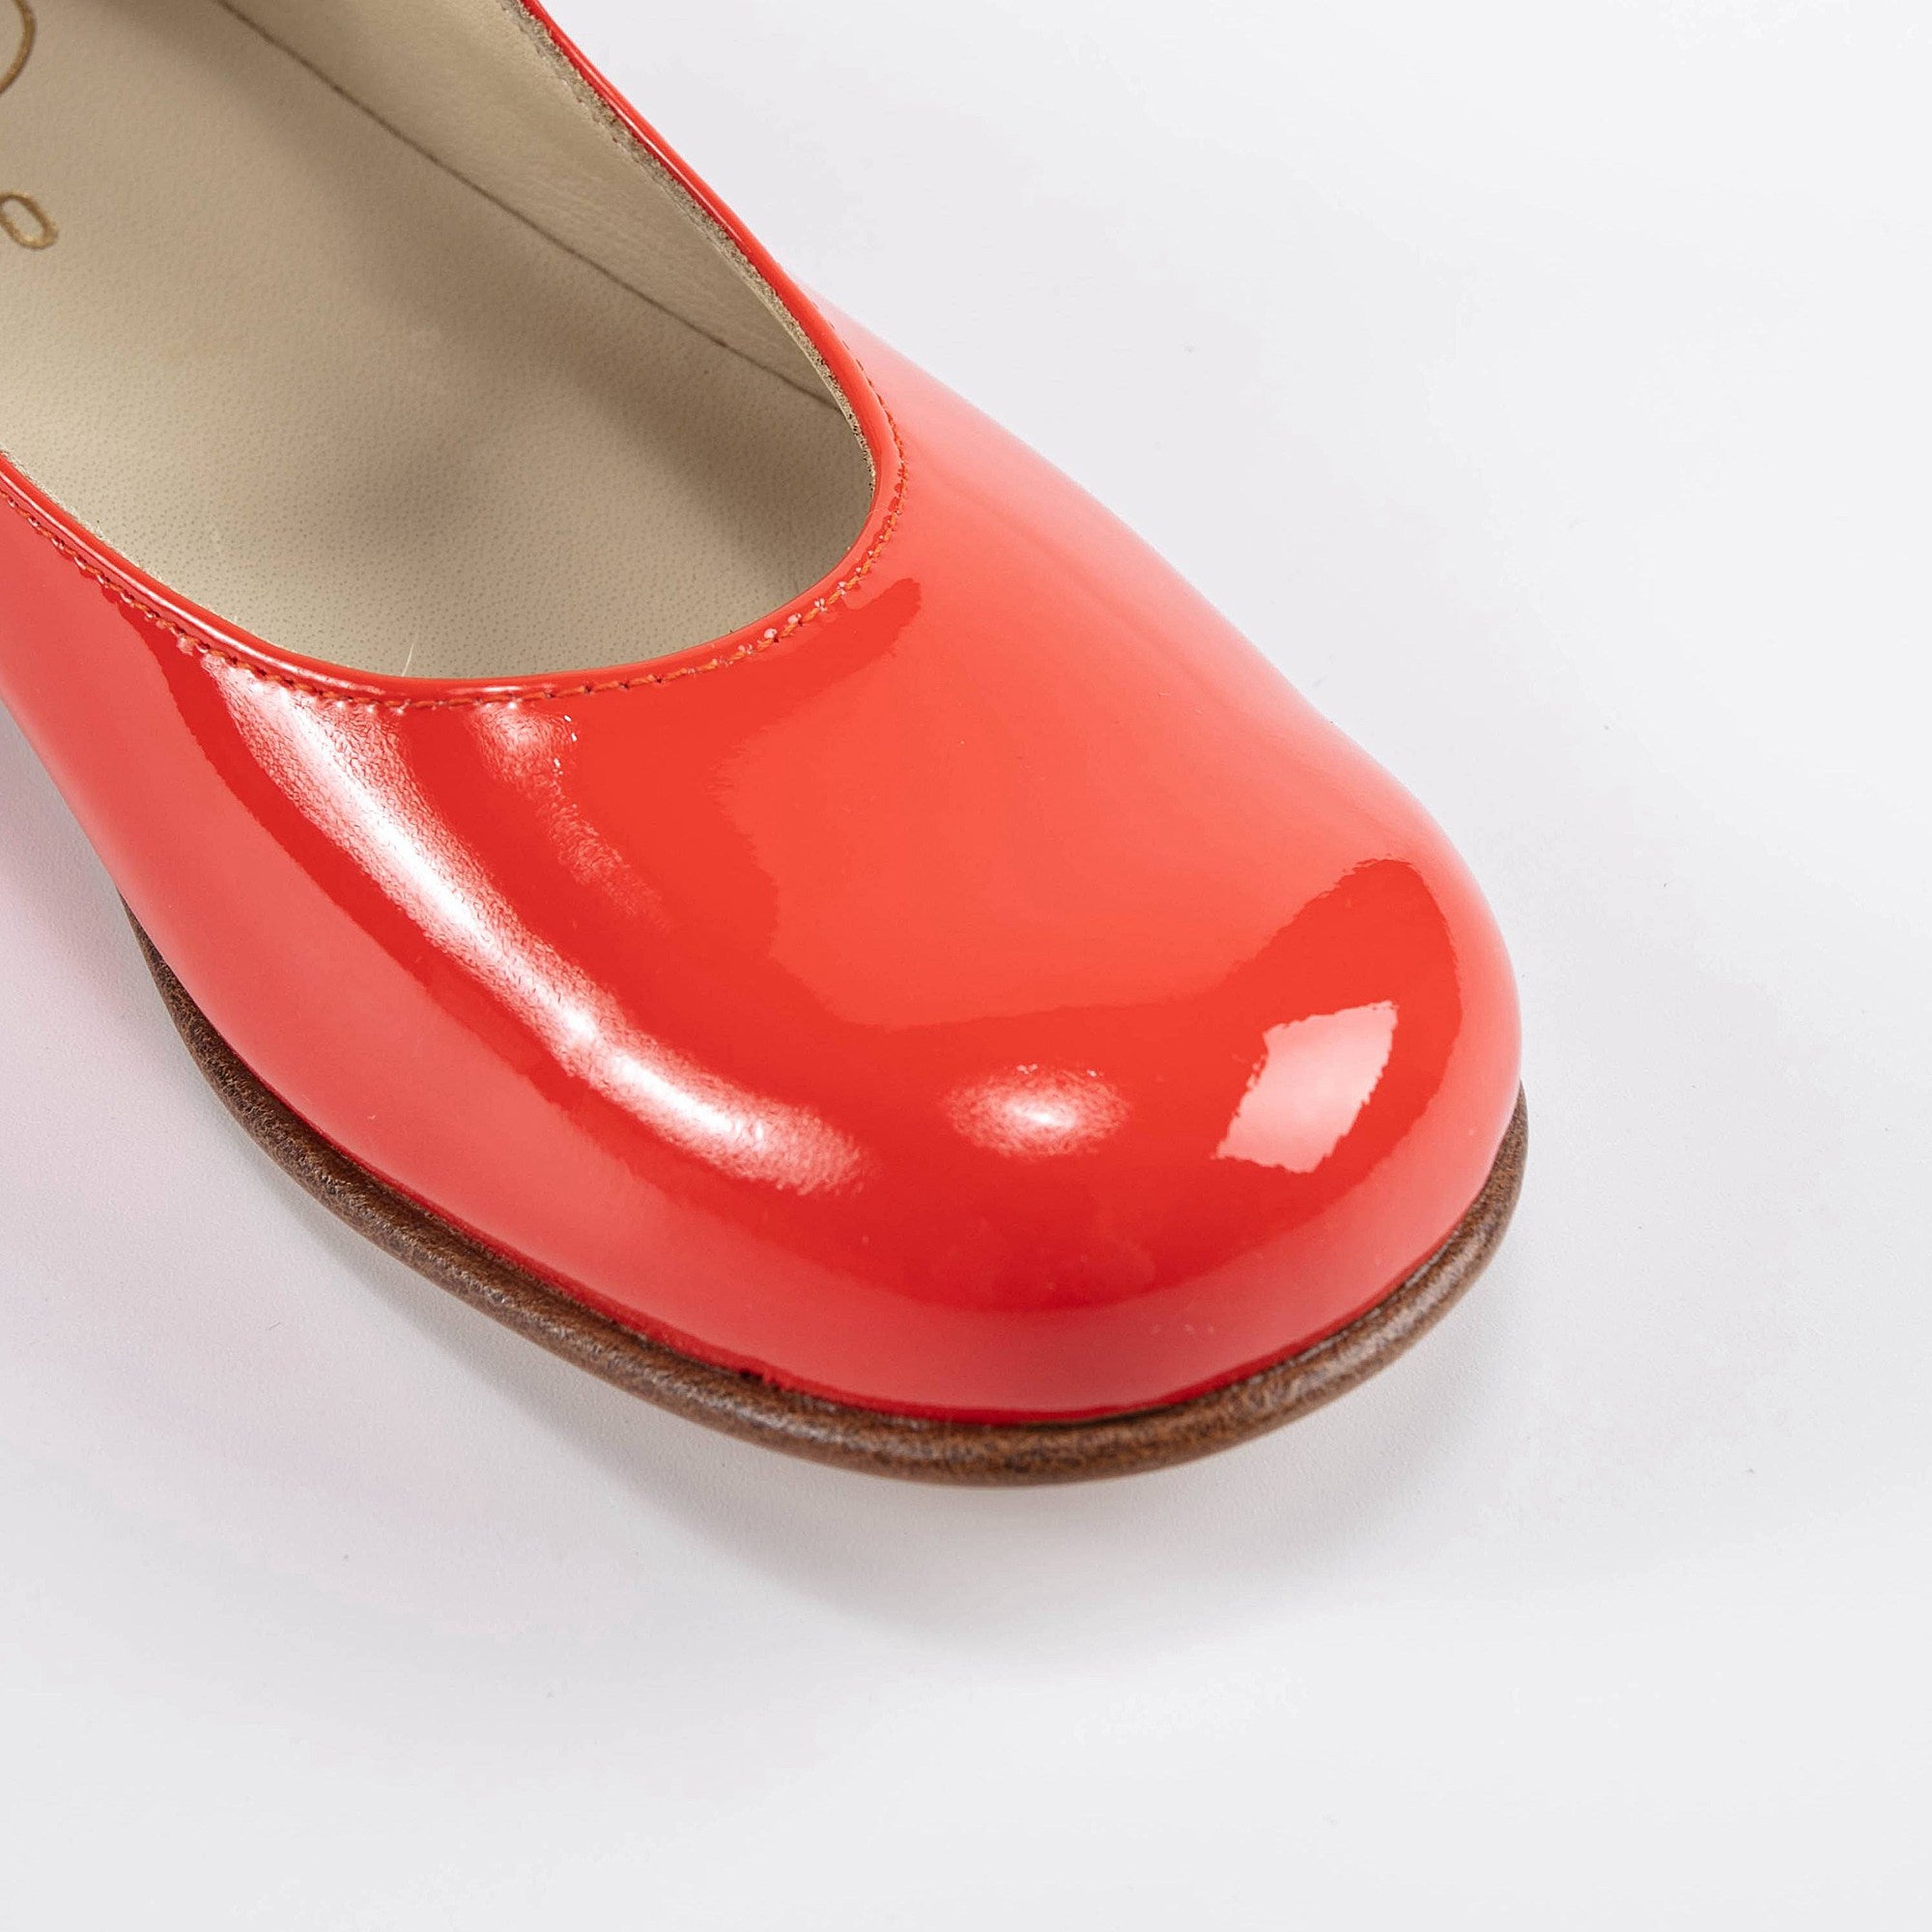 Girls Bright Red Leather Shoes